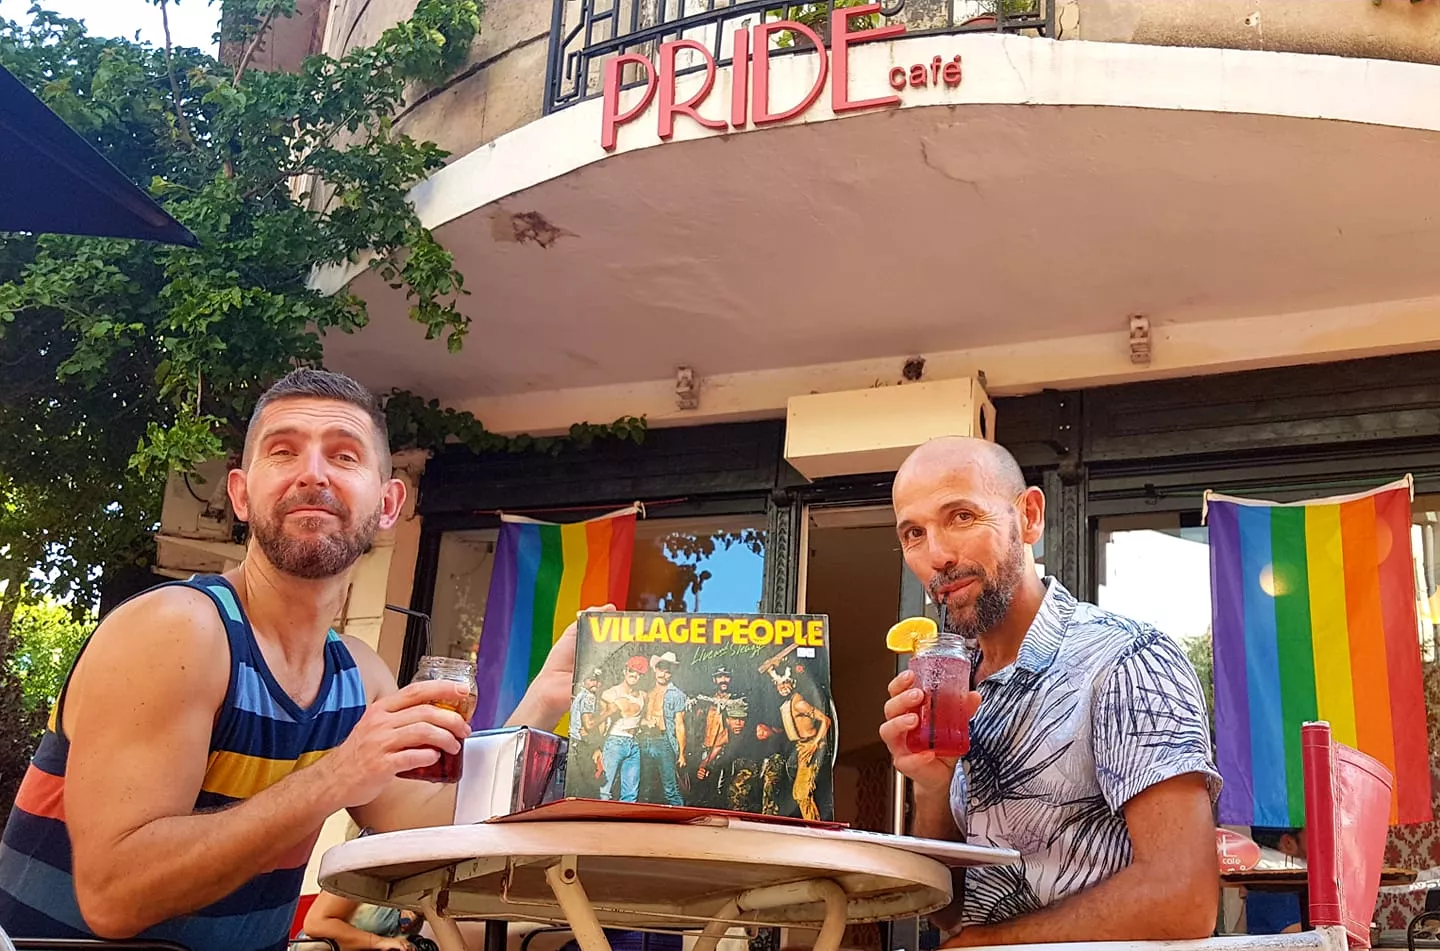 Pride Cafe in Argentina, South America | LGBT-Friendly Places,Cafes - Rated 4.3